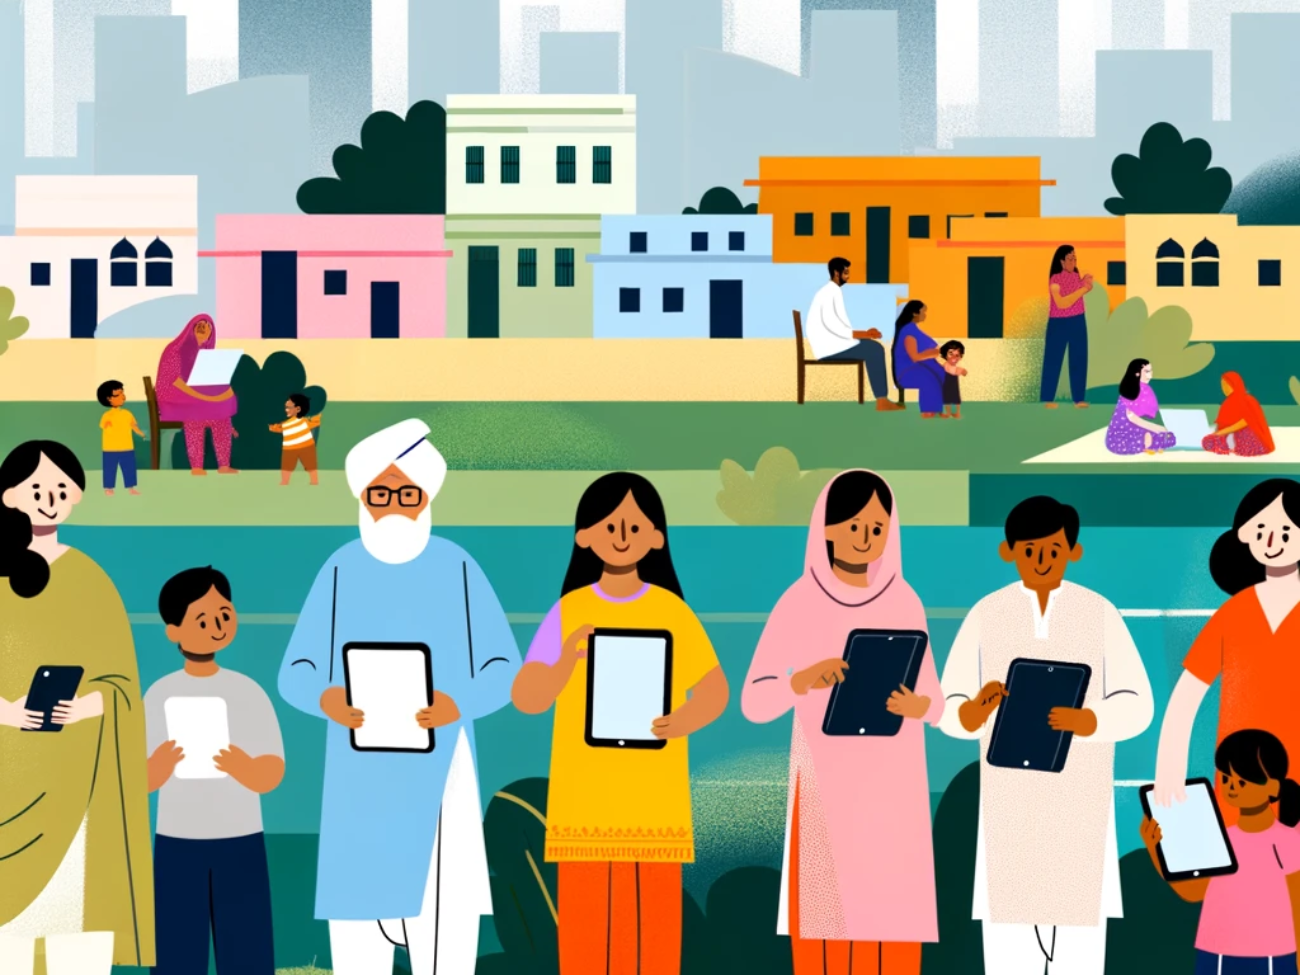 DALL·E 2024-05-13 09.51.07 - A minimalistic illustration of diverse Indian citizens of various ages and backgrounds using digital devices like smartphones, tablets, and laptops, s